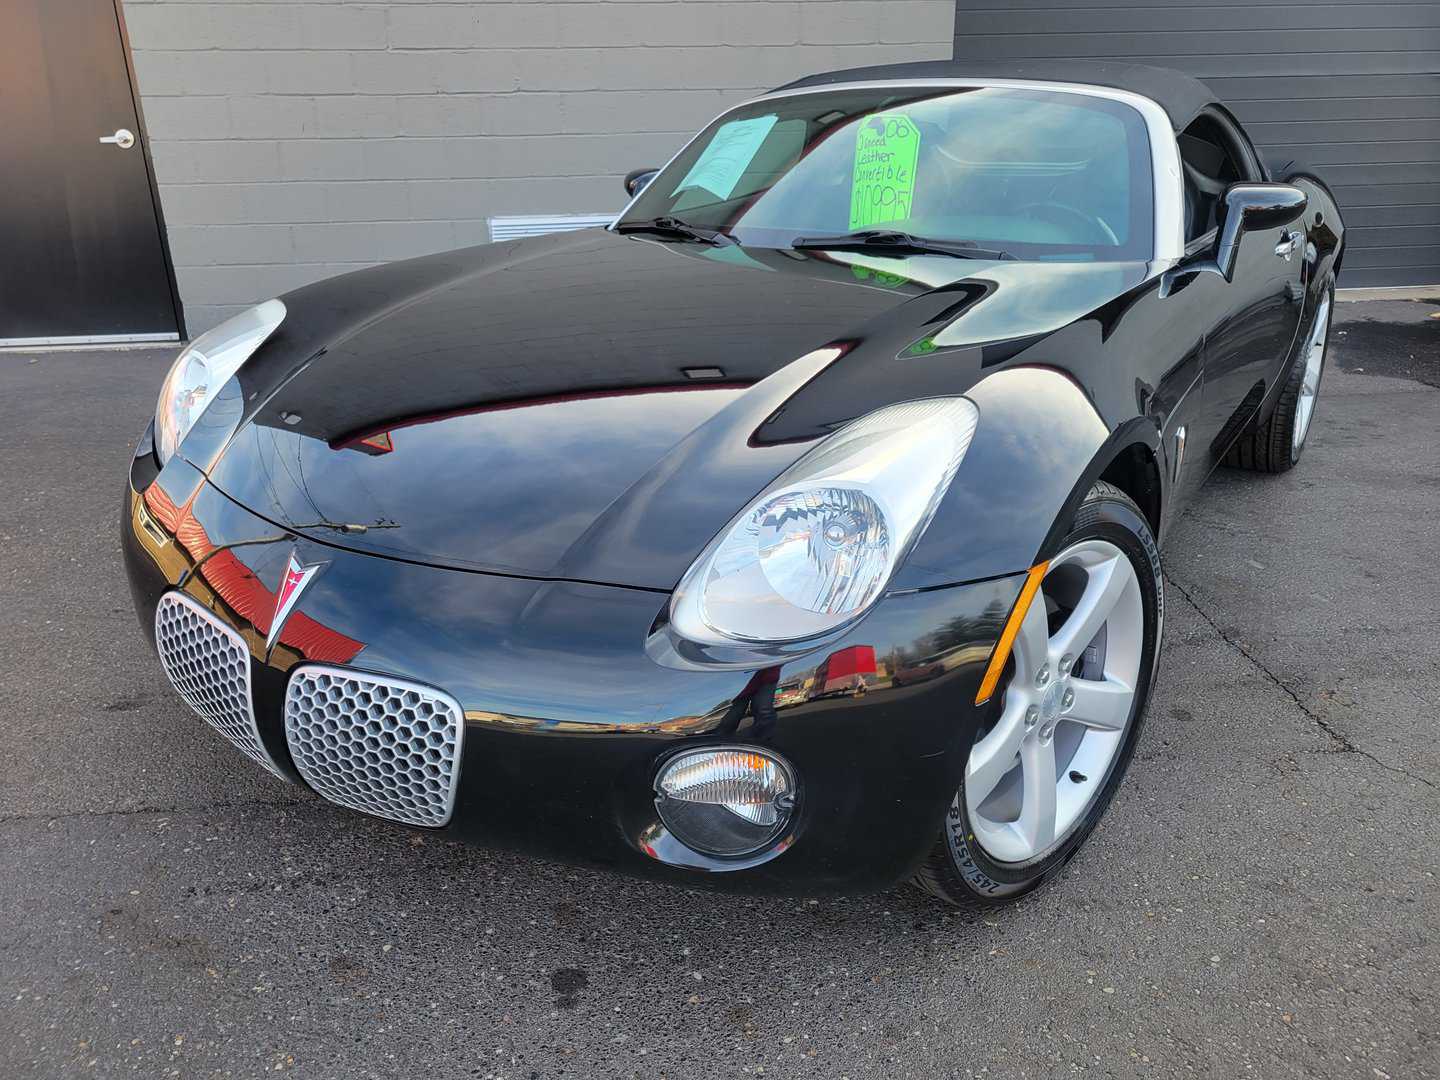 A 2006 Black Pontiac Solstice Is Parked In Front Of A Building.